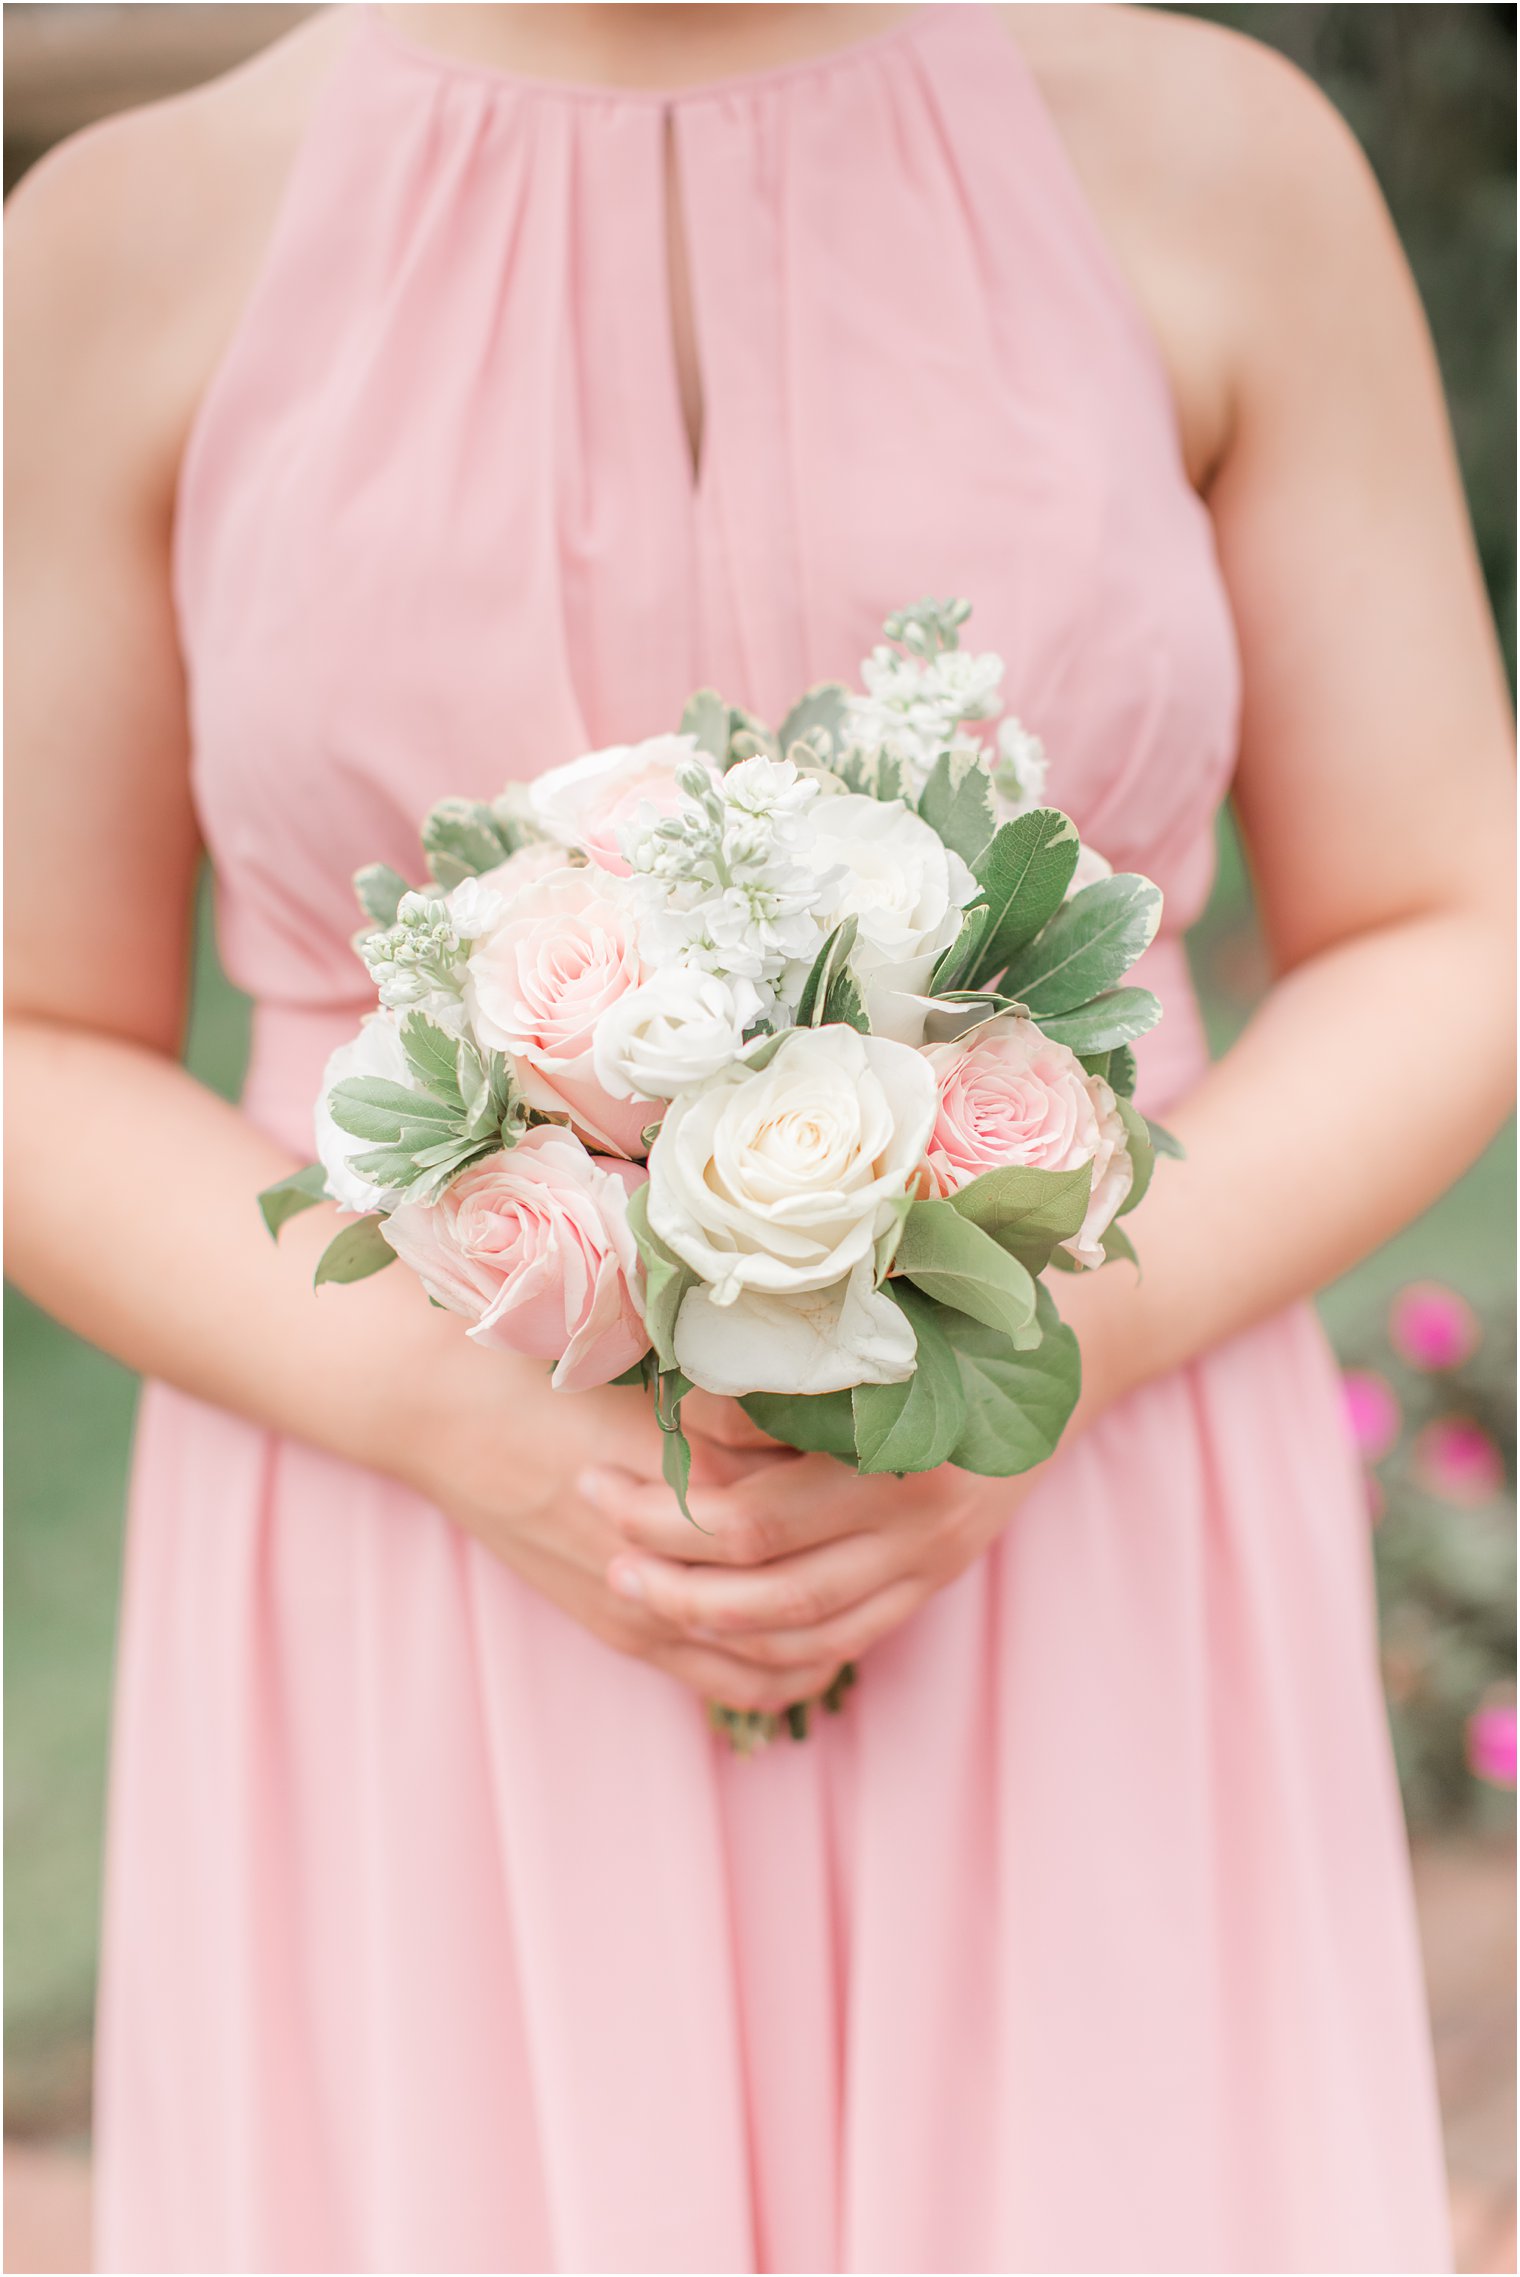 Bridesmaid bouquet by Blooming Brides Florist